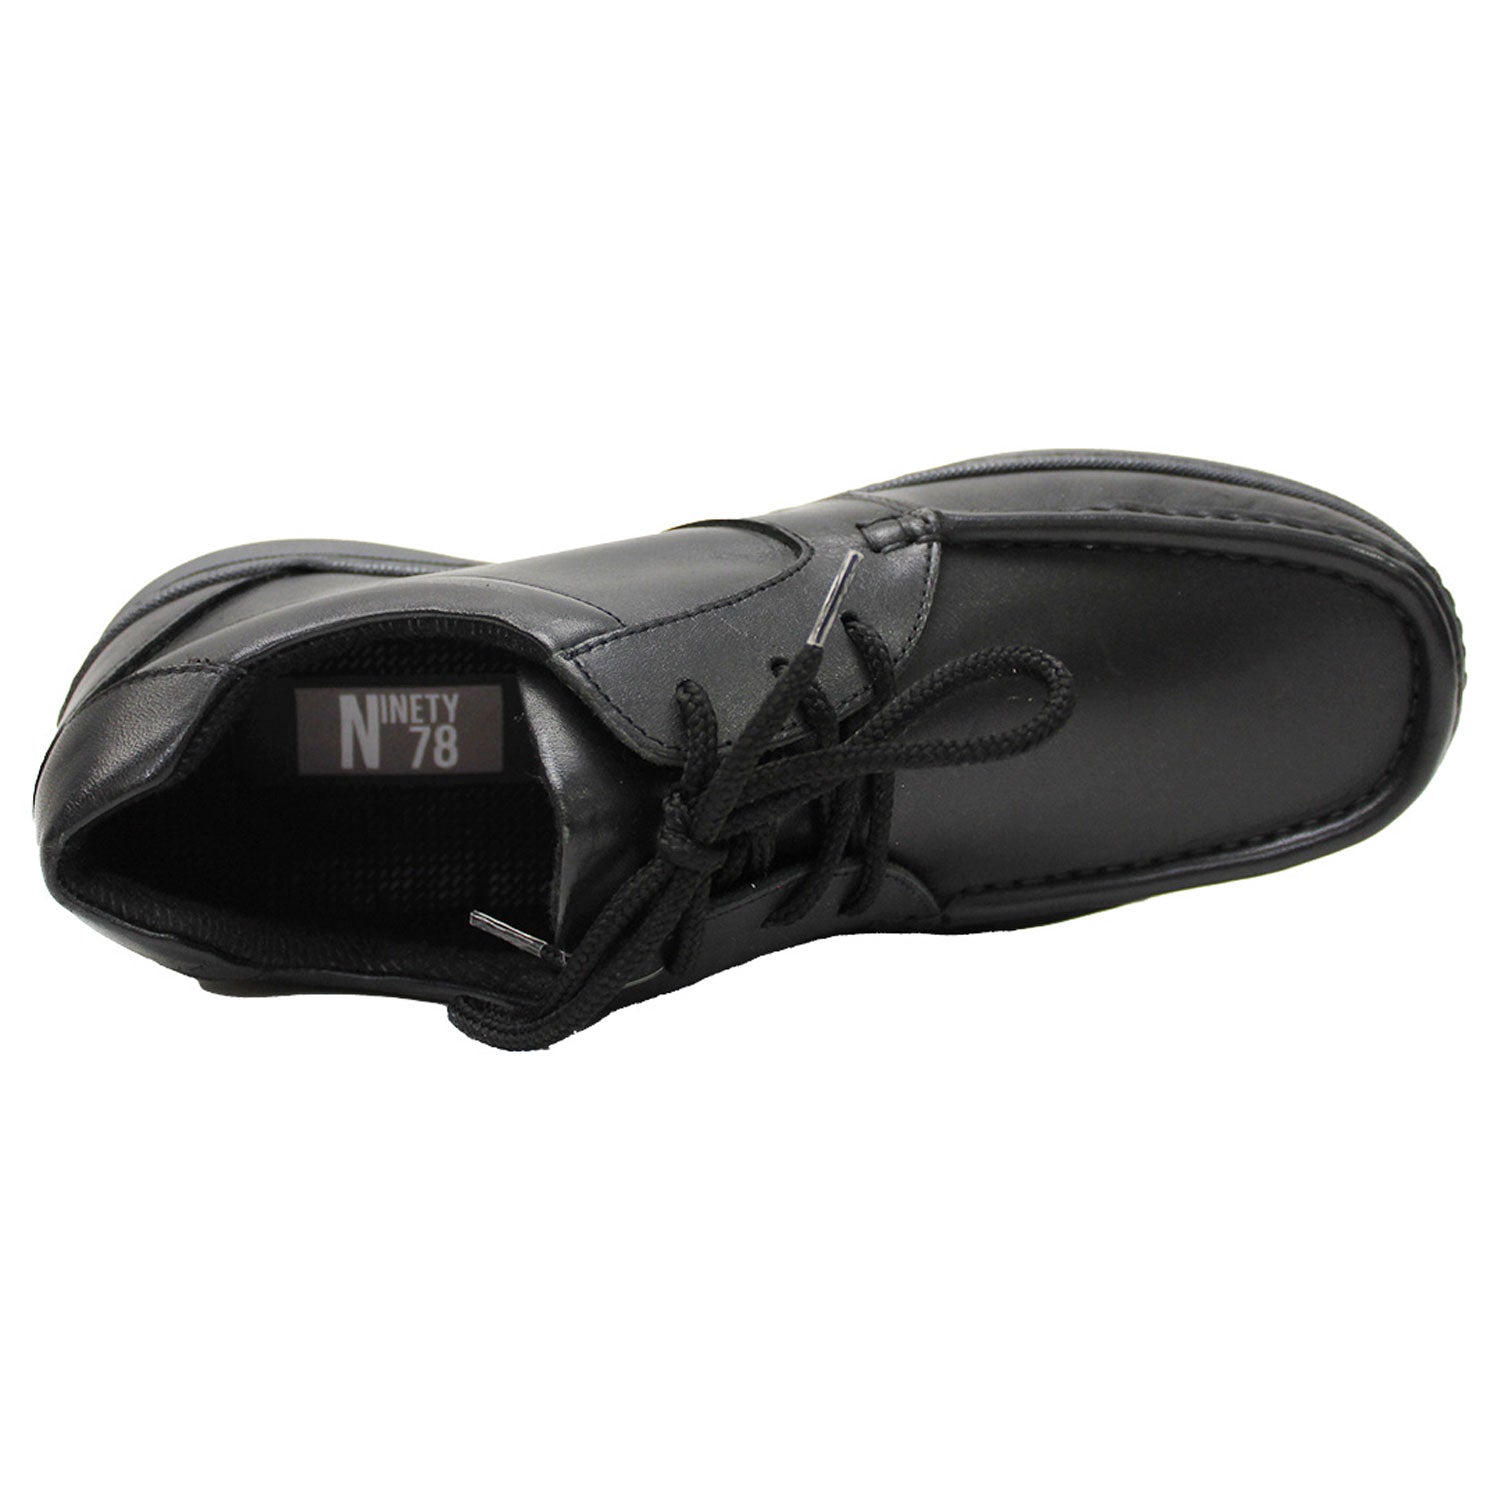 Ninety 78 Lace Up School Shoe - Black 3 Shaws Department Stores